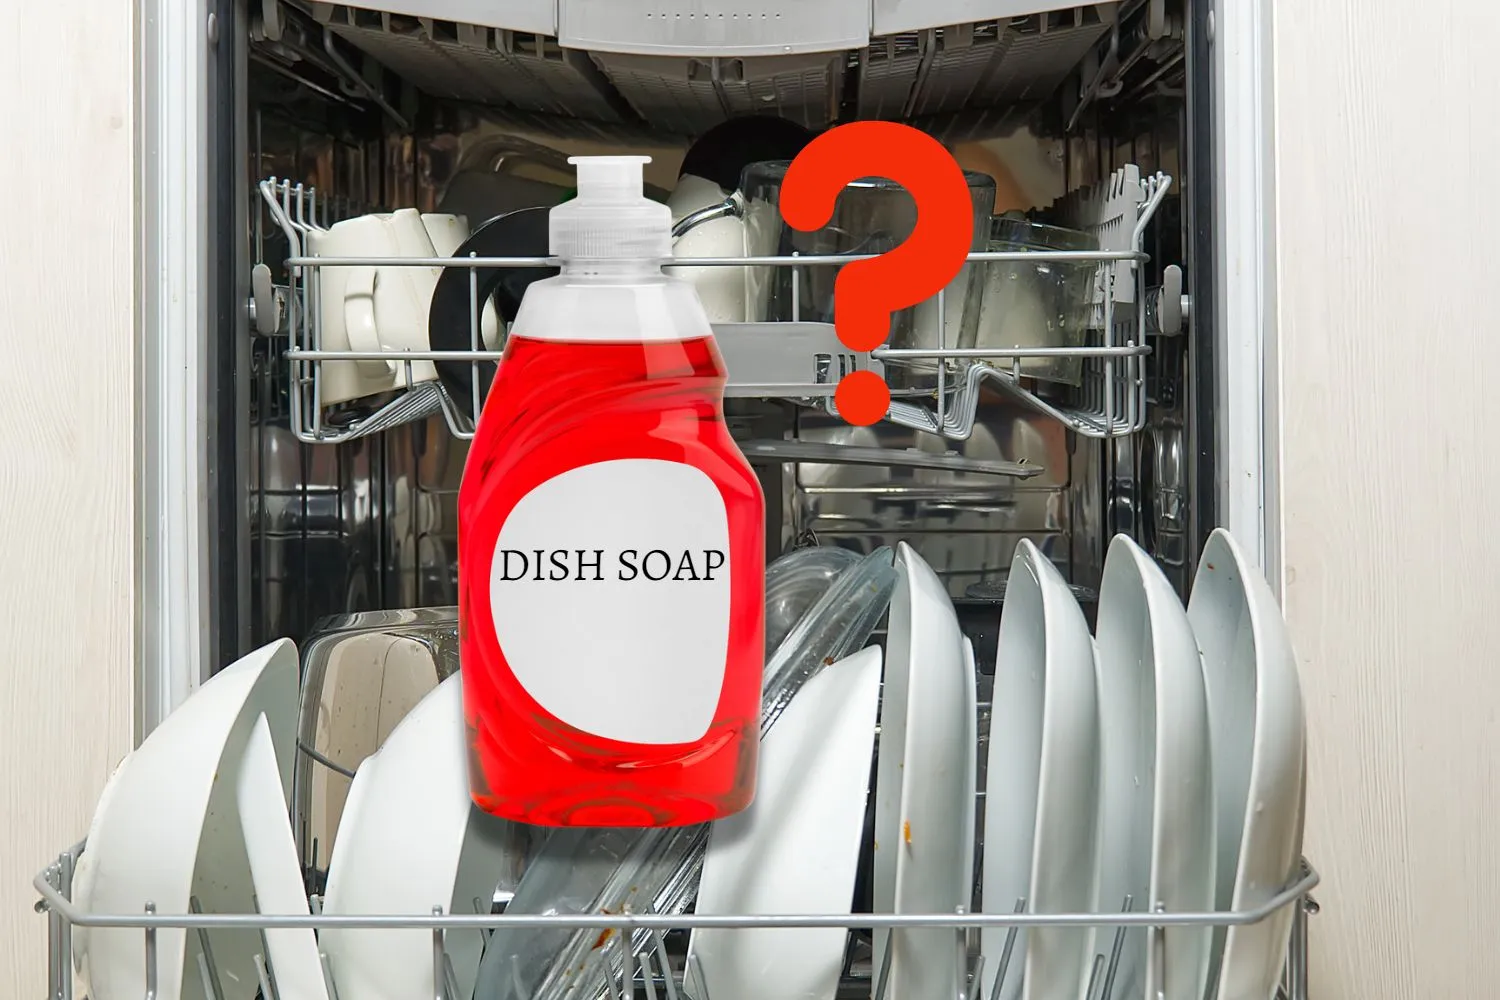 Can You Use Dish Soap In a Dishwasher?